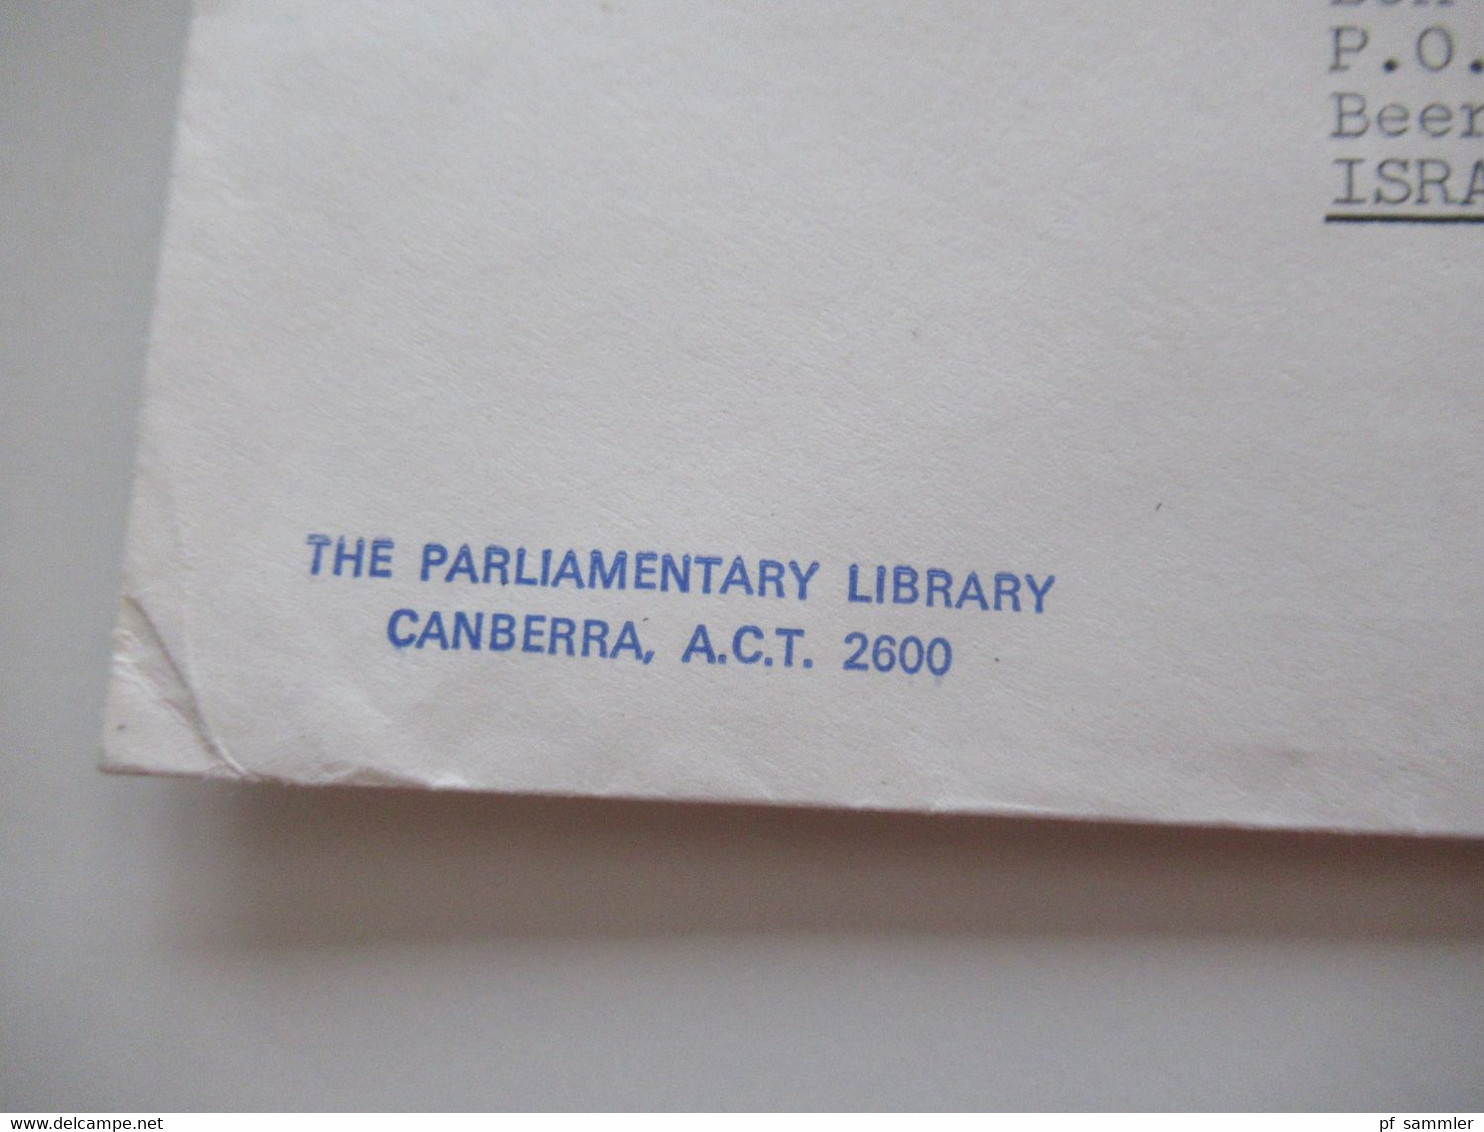 1976 Air Mail Nach Israel Freistempel Canberra Parliament House IW 9 Postage Paid Umschlag The Parliament Library - Briefe U. Dokumente